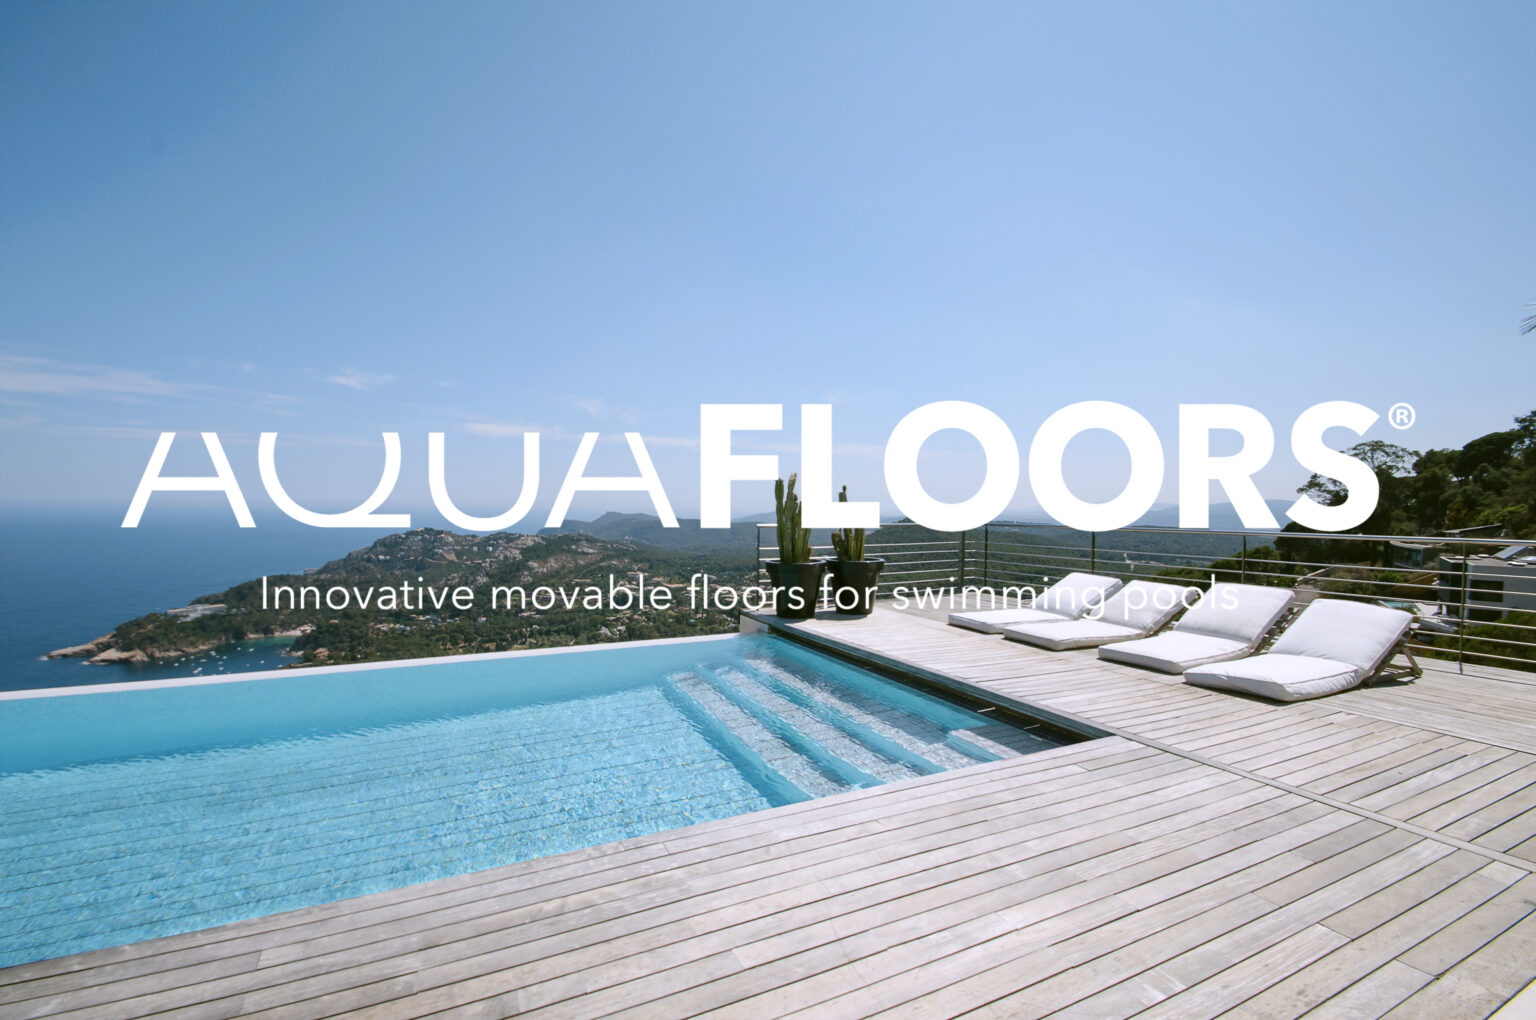 Meet AquaFloors – one of the manufacturing leaders of pool covers!